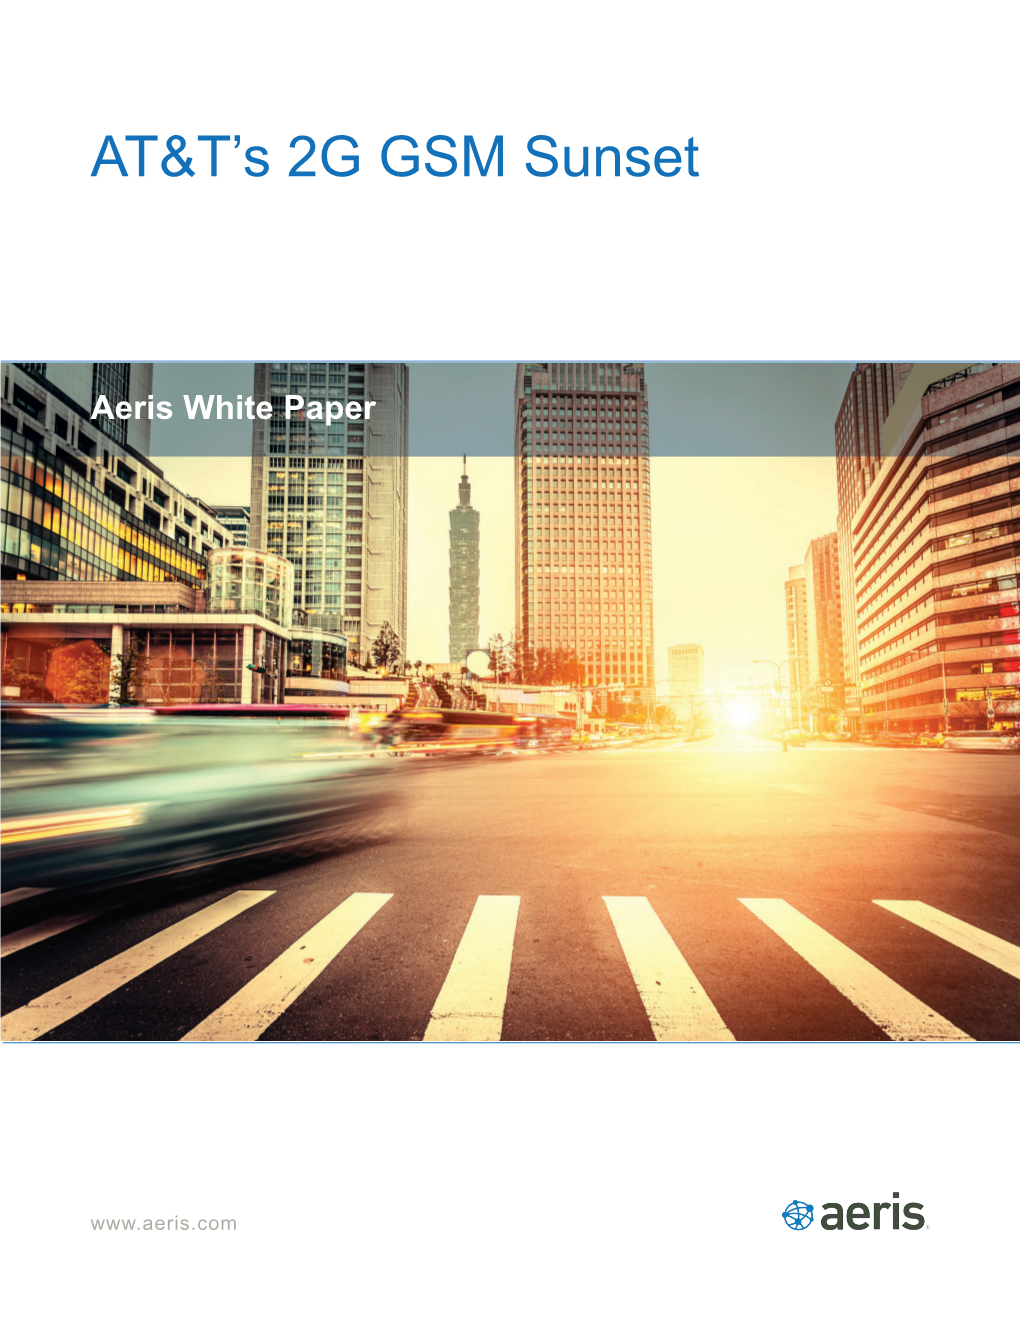 AT&T's 2G GSM Sunset